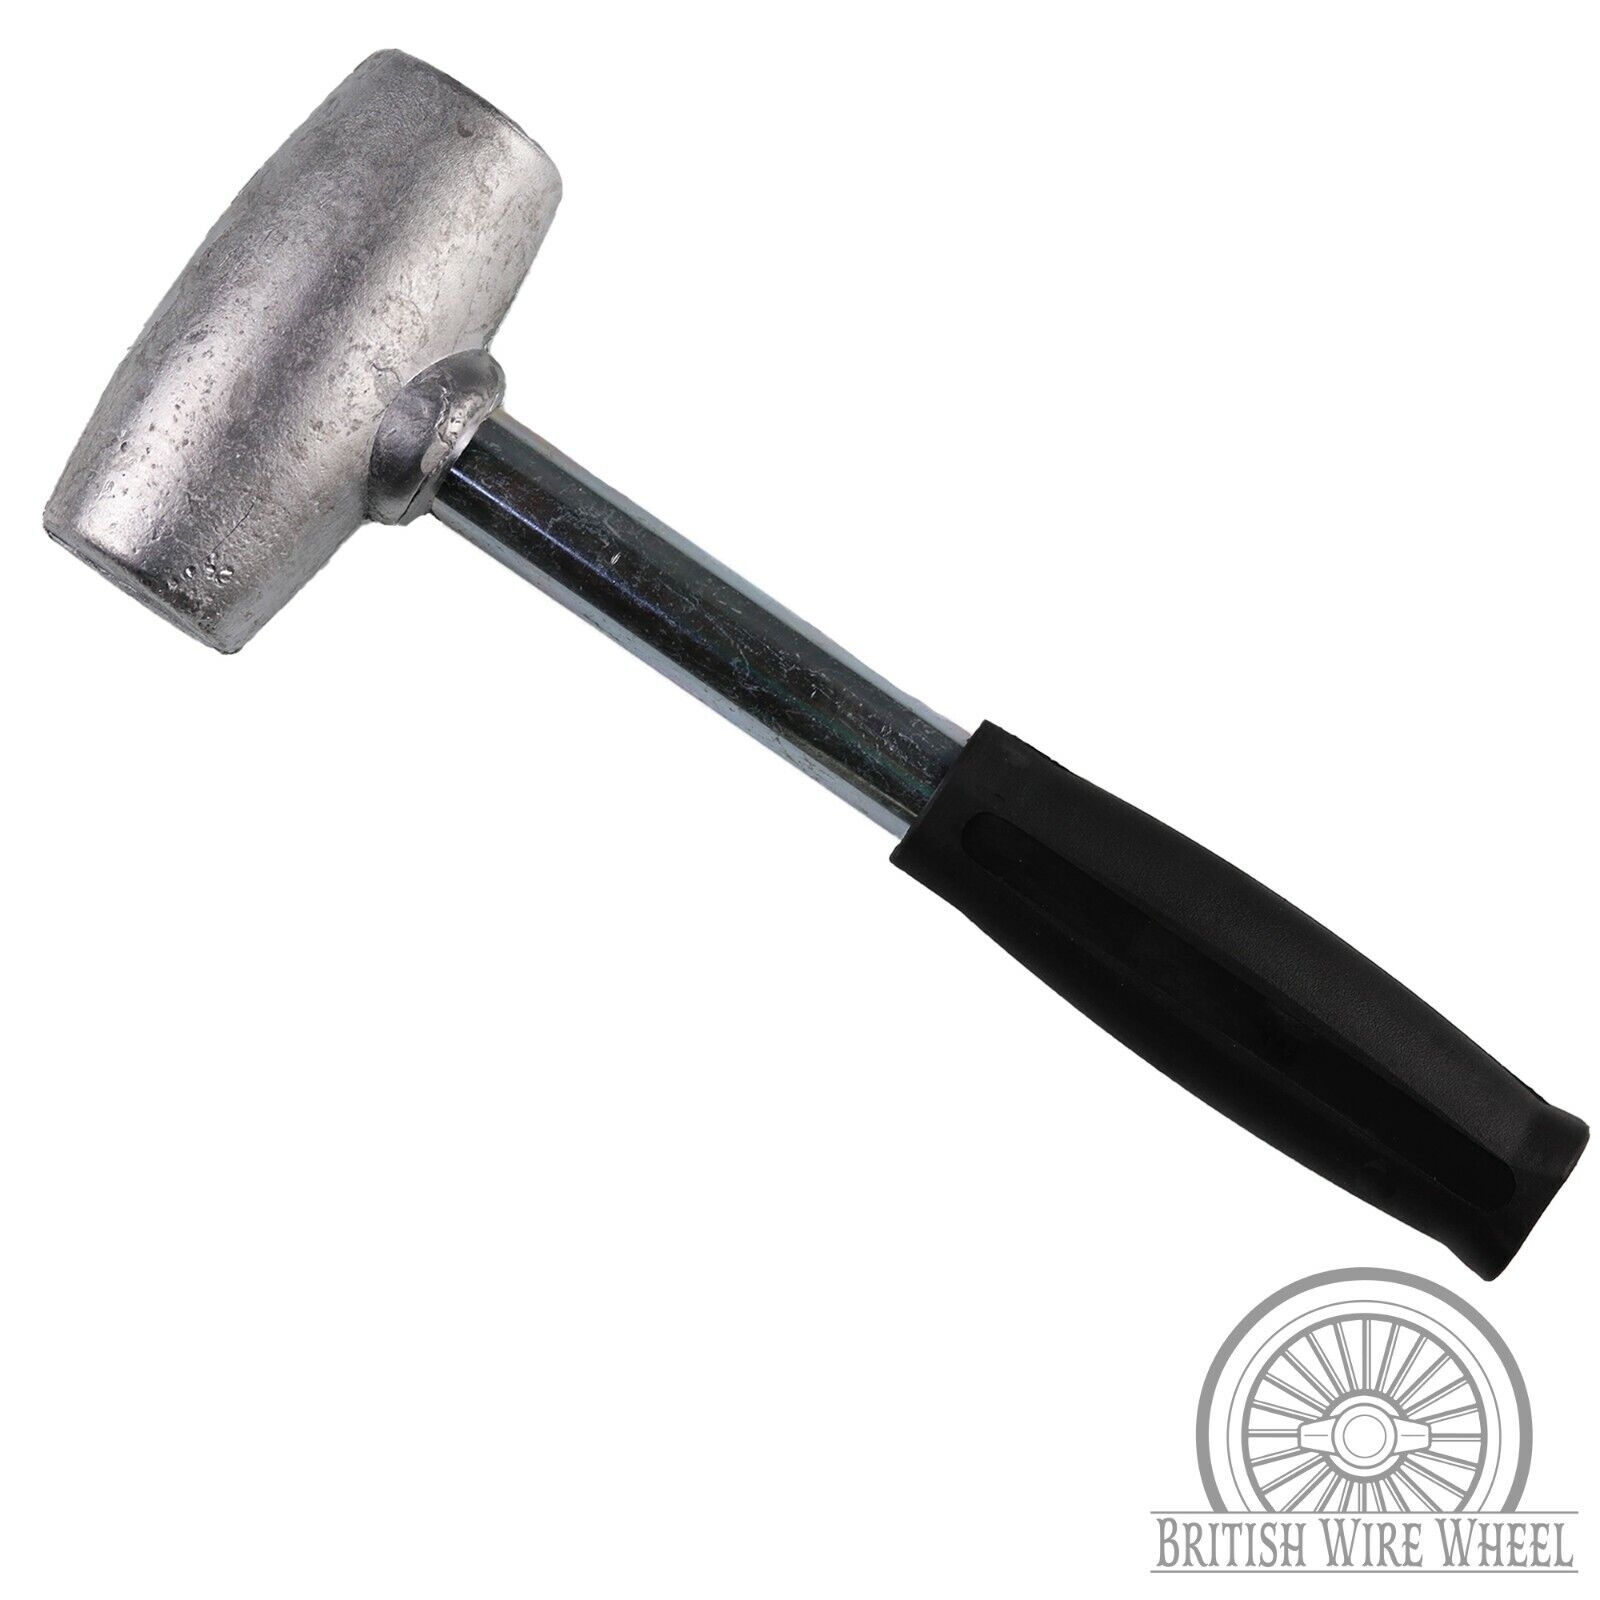 4lb Lead Hammer for Knock Off Spinner Caps on Lowrider Wire Wheels, Non-Marring